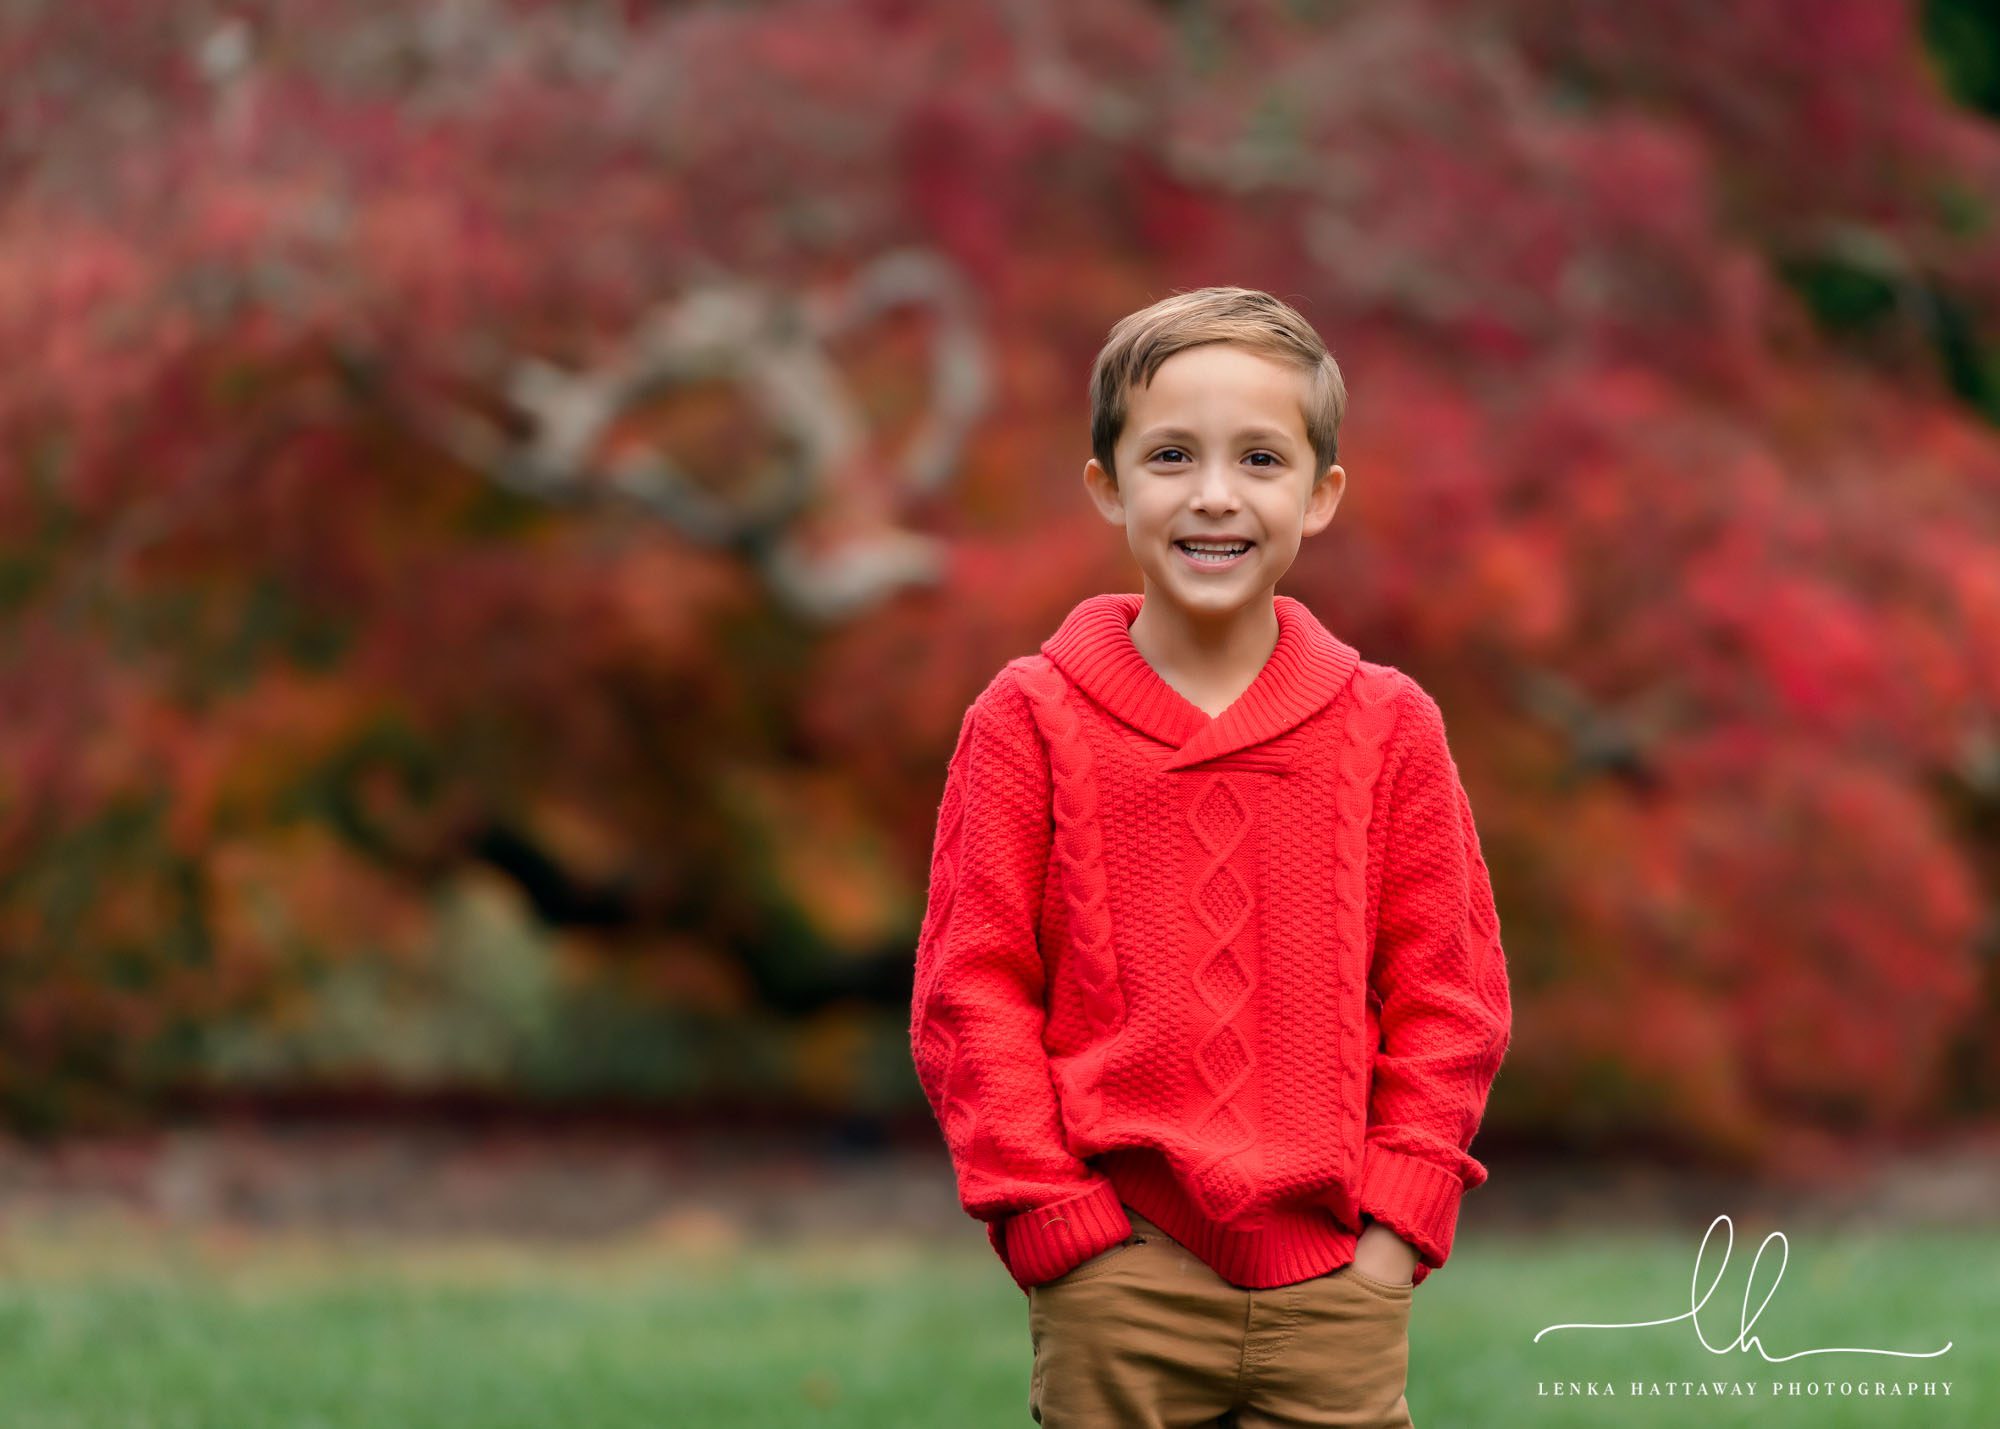 Sweet smiling boy photo with beautiful fall colors.